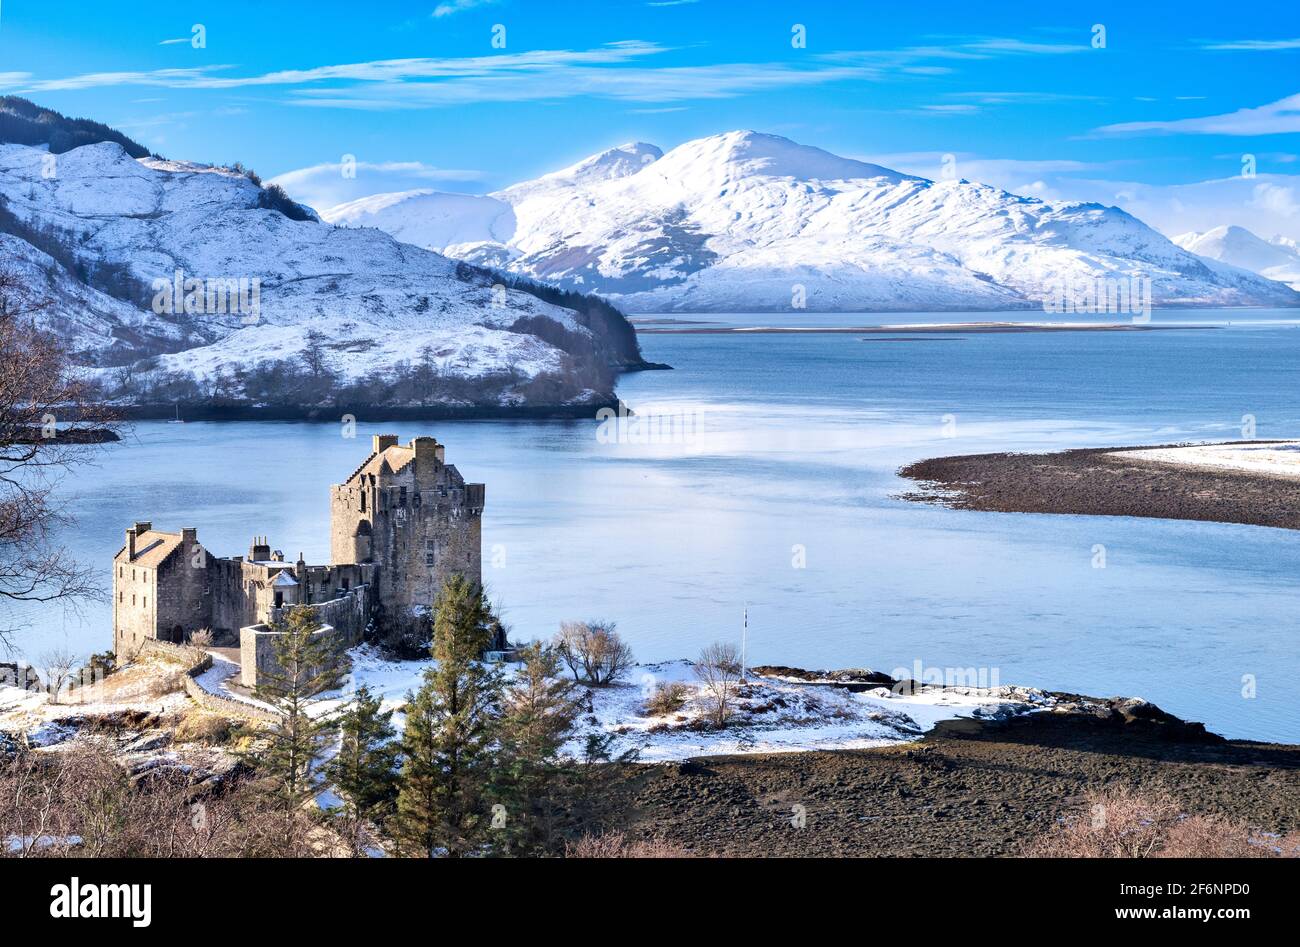 EILEAN DONAN CASTLE LOCH DUICH HIGHLAND SCOTLAND A BLUE SKY THE CASTLE IN WINTER  HEAVY FALL OF SNOW ON THE  HILLS Stock Photo